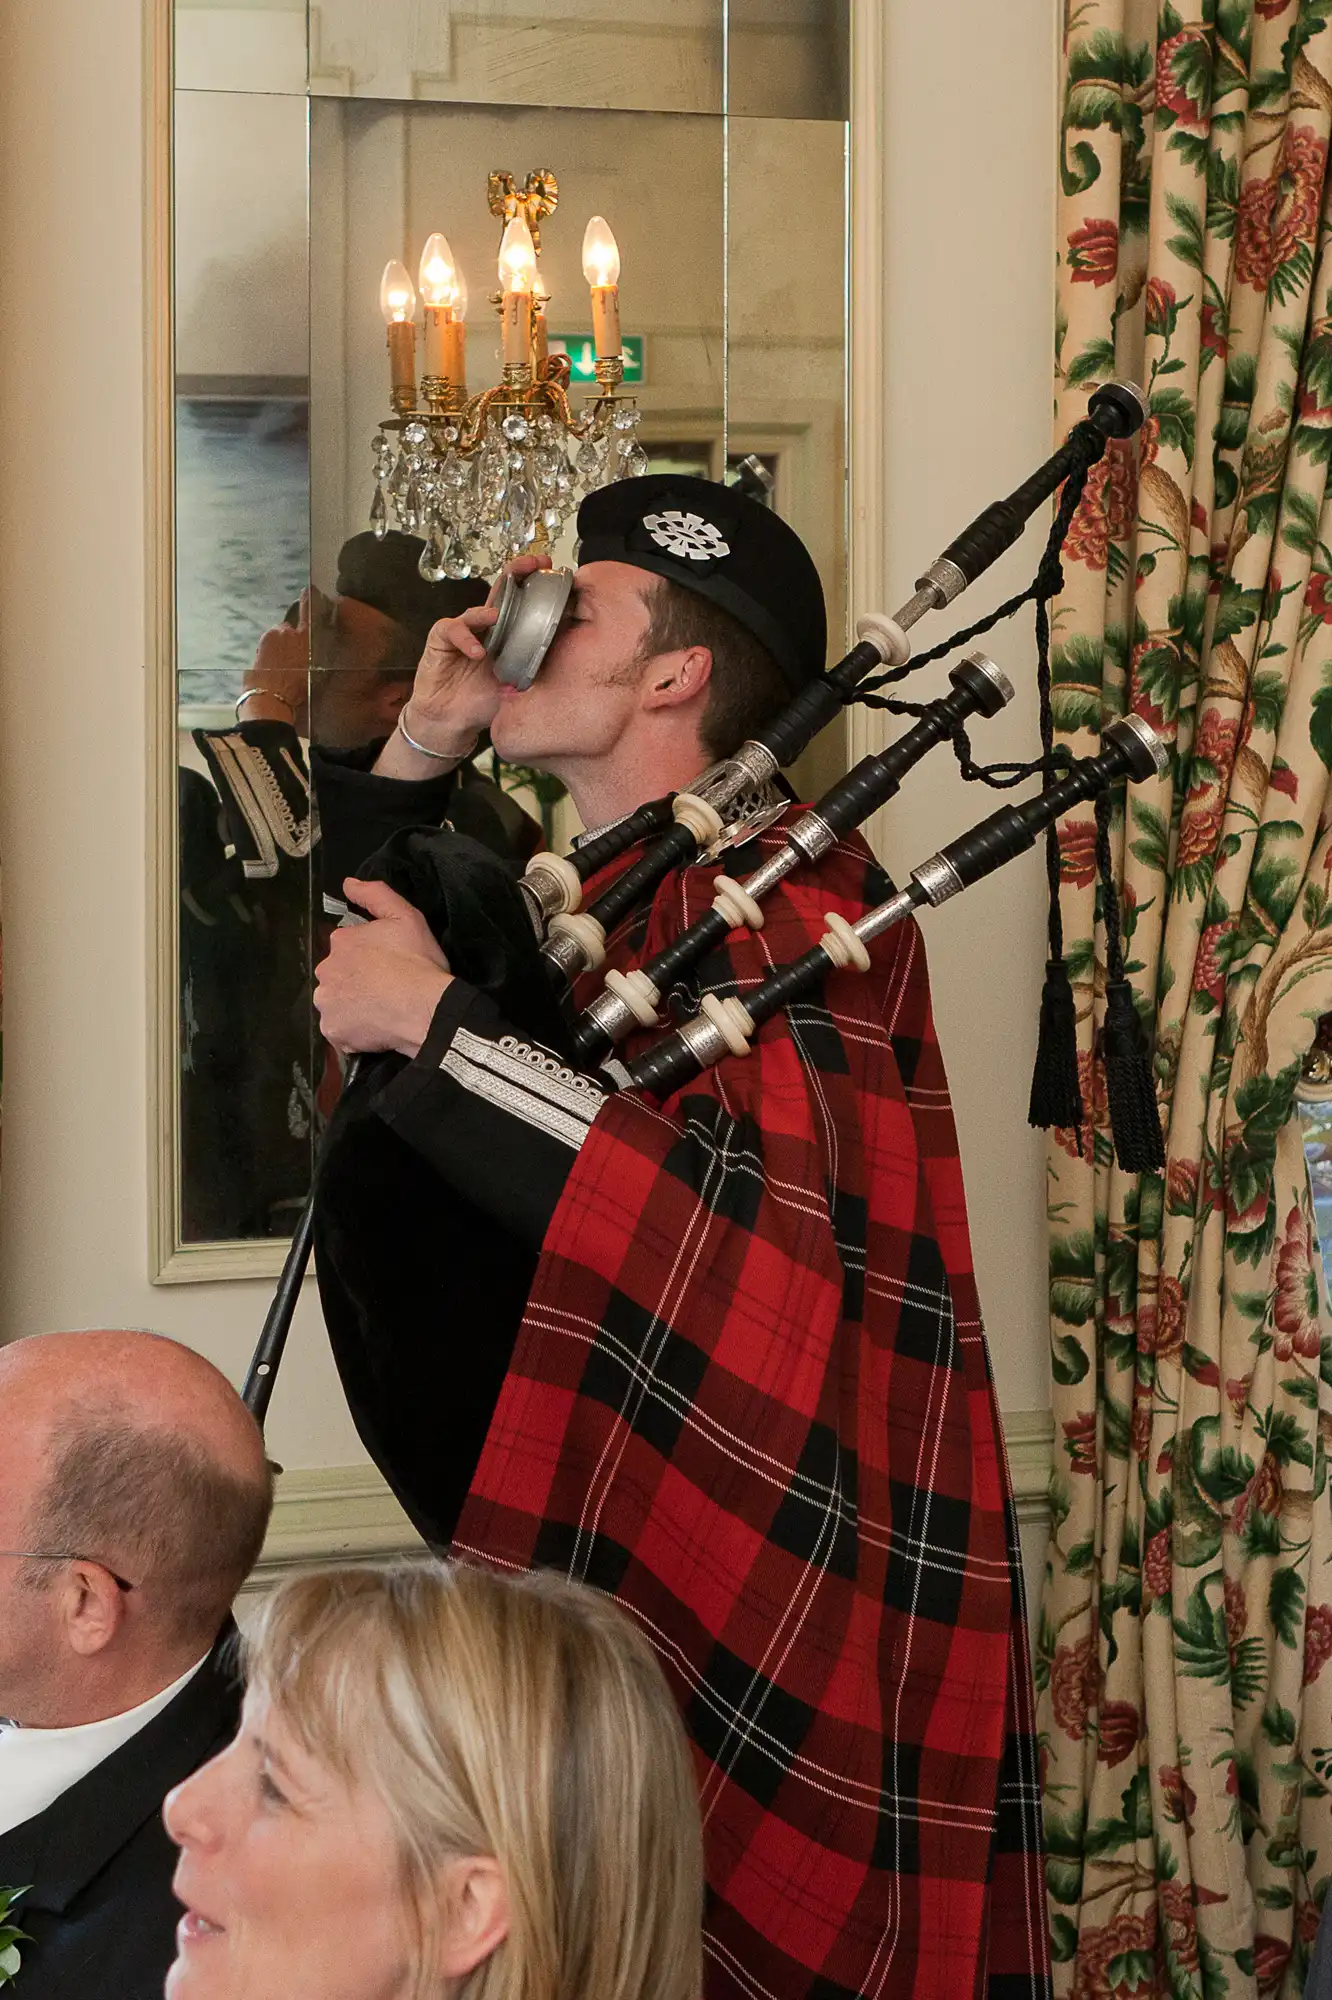 A man in traditional scottish attire, including a kilt and tartan plaid, drinks from a cup while holding bagpipes at a formal indoor event.